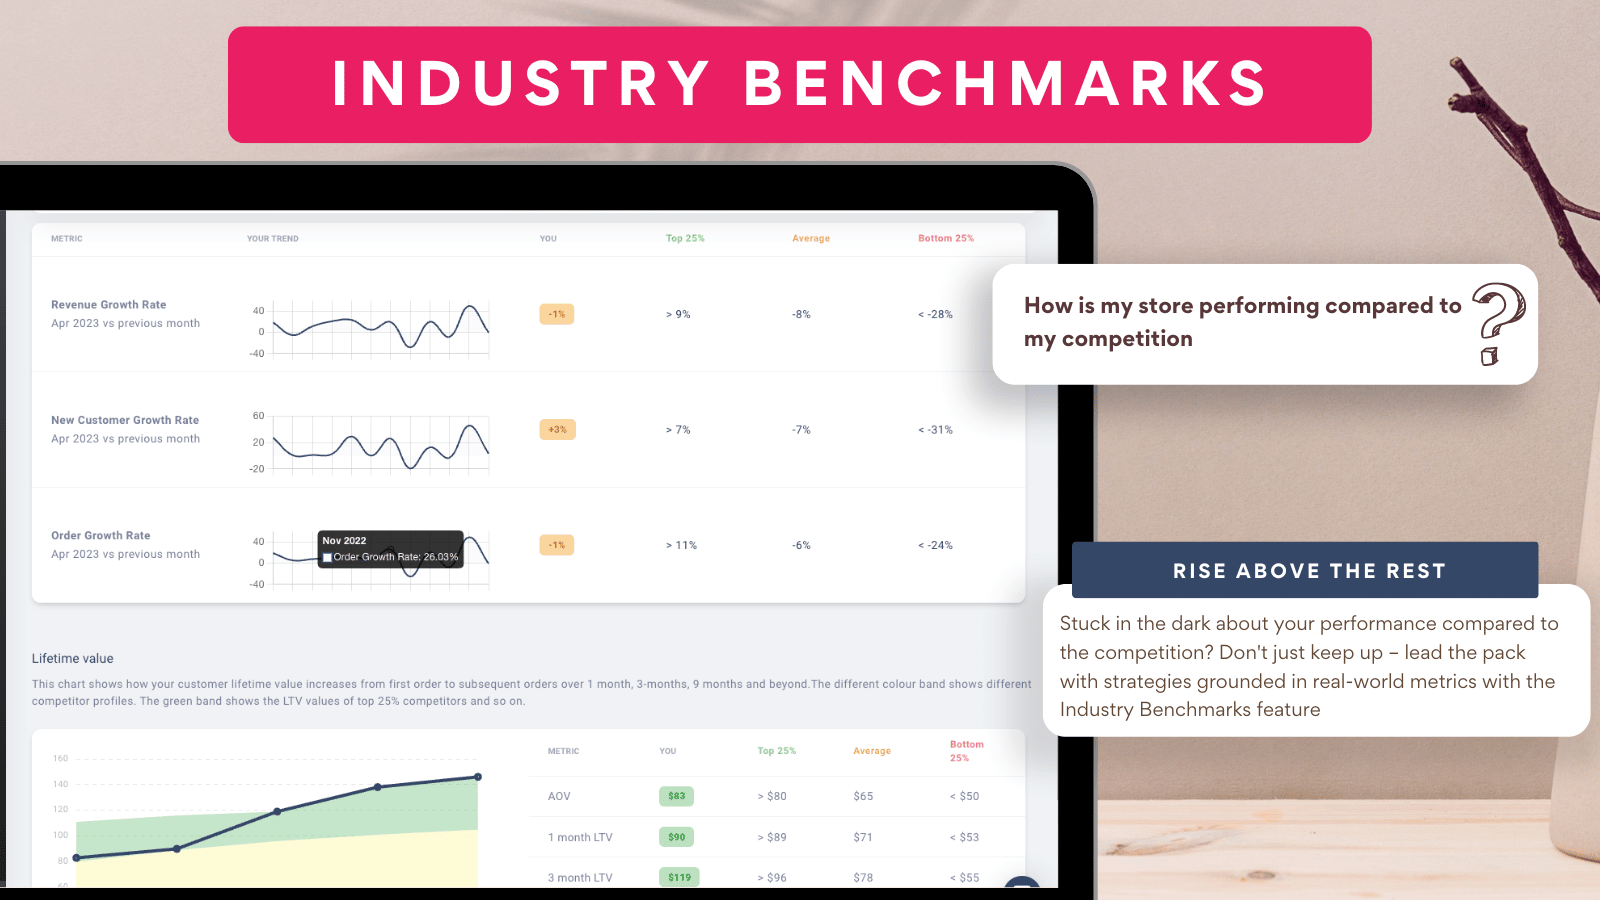 Industry Benchmarks and competitor benchmarking